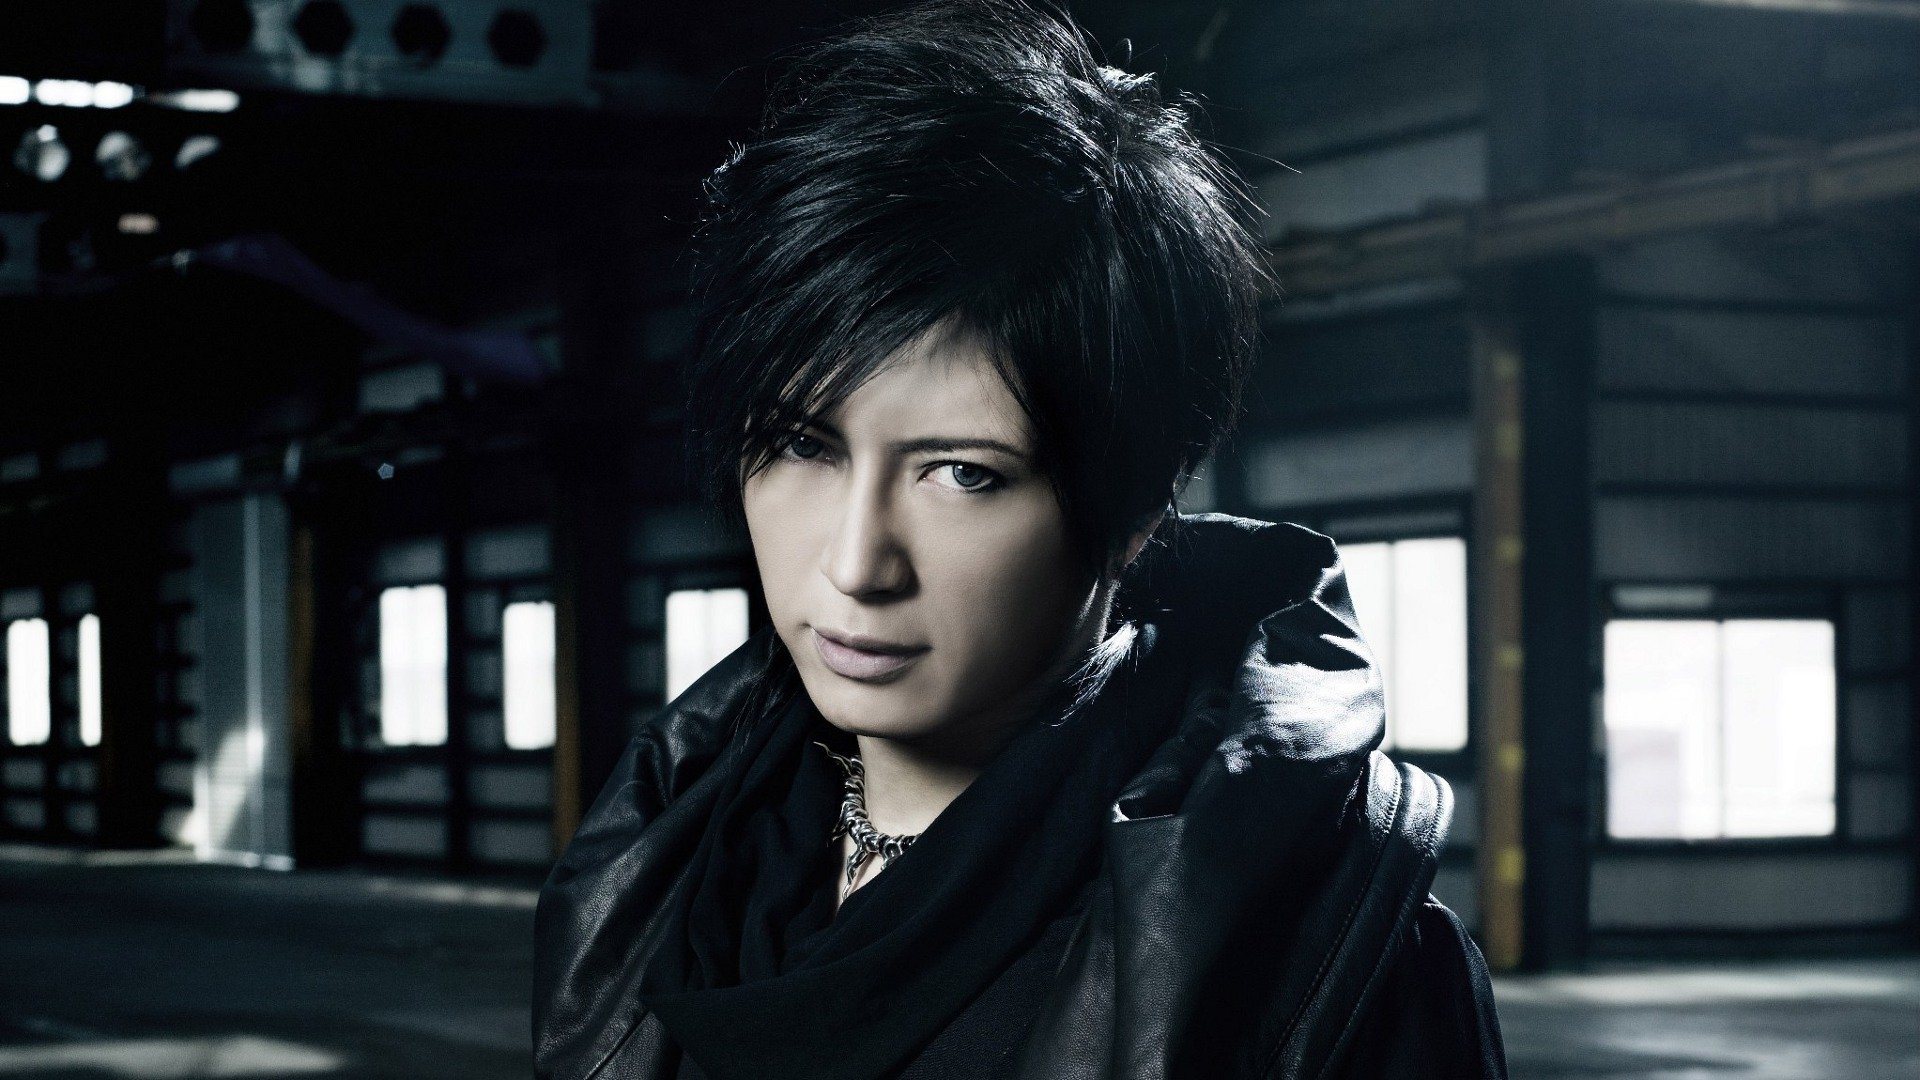 Gackt Hd Wallpaper Background Image 1920x1080 Id 500446 Wallpaper Abyss